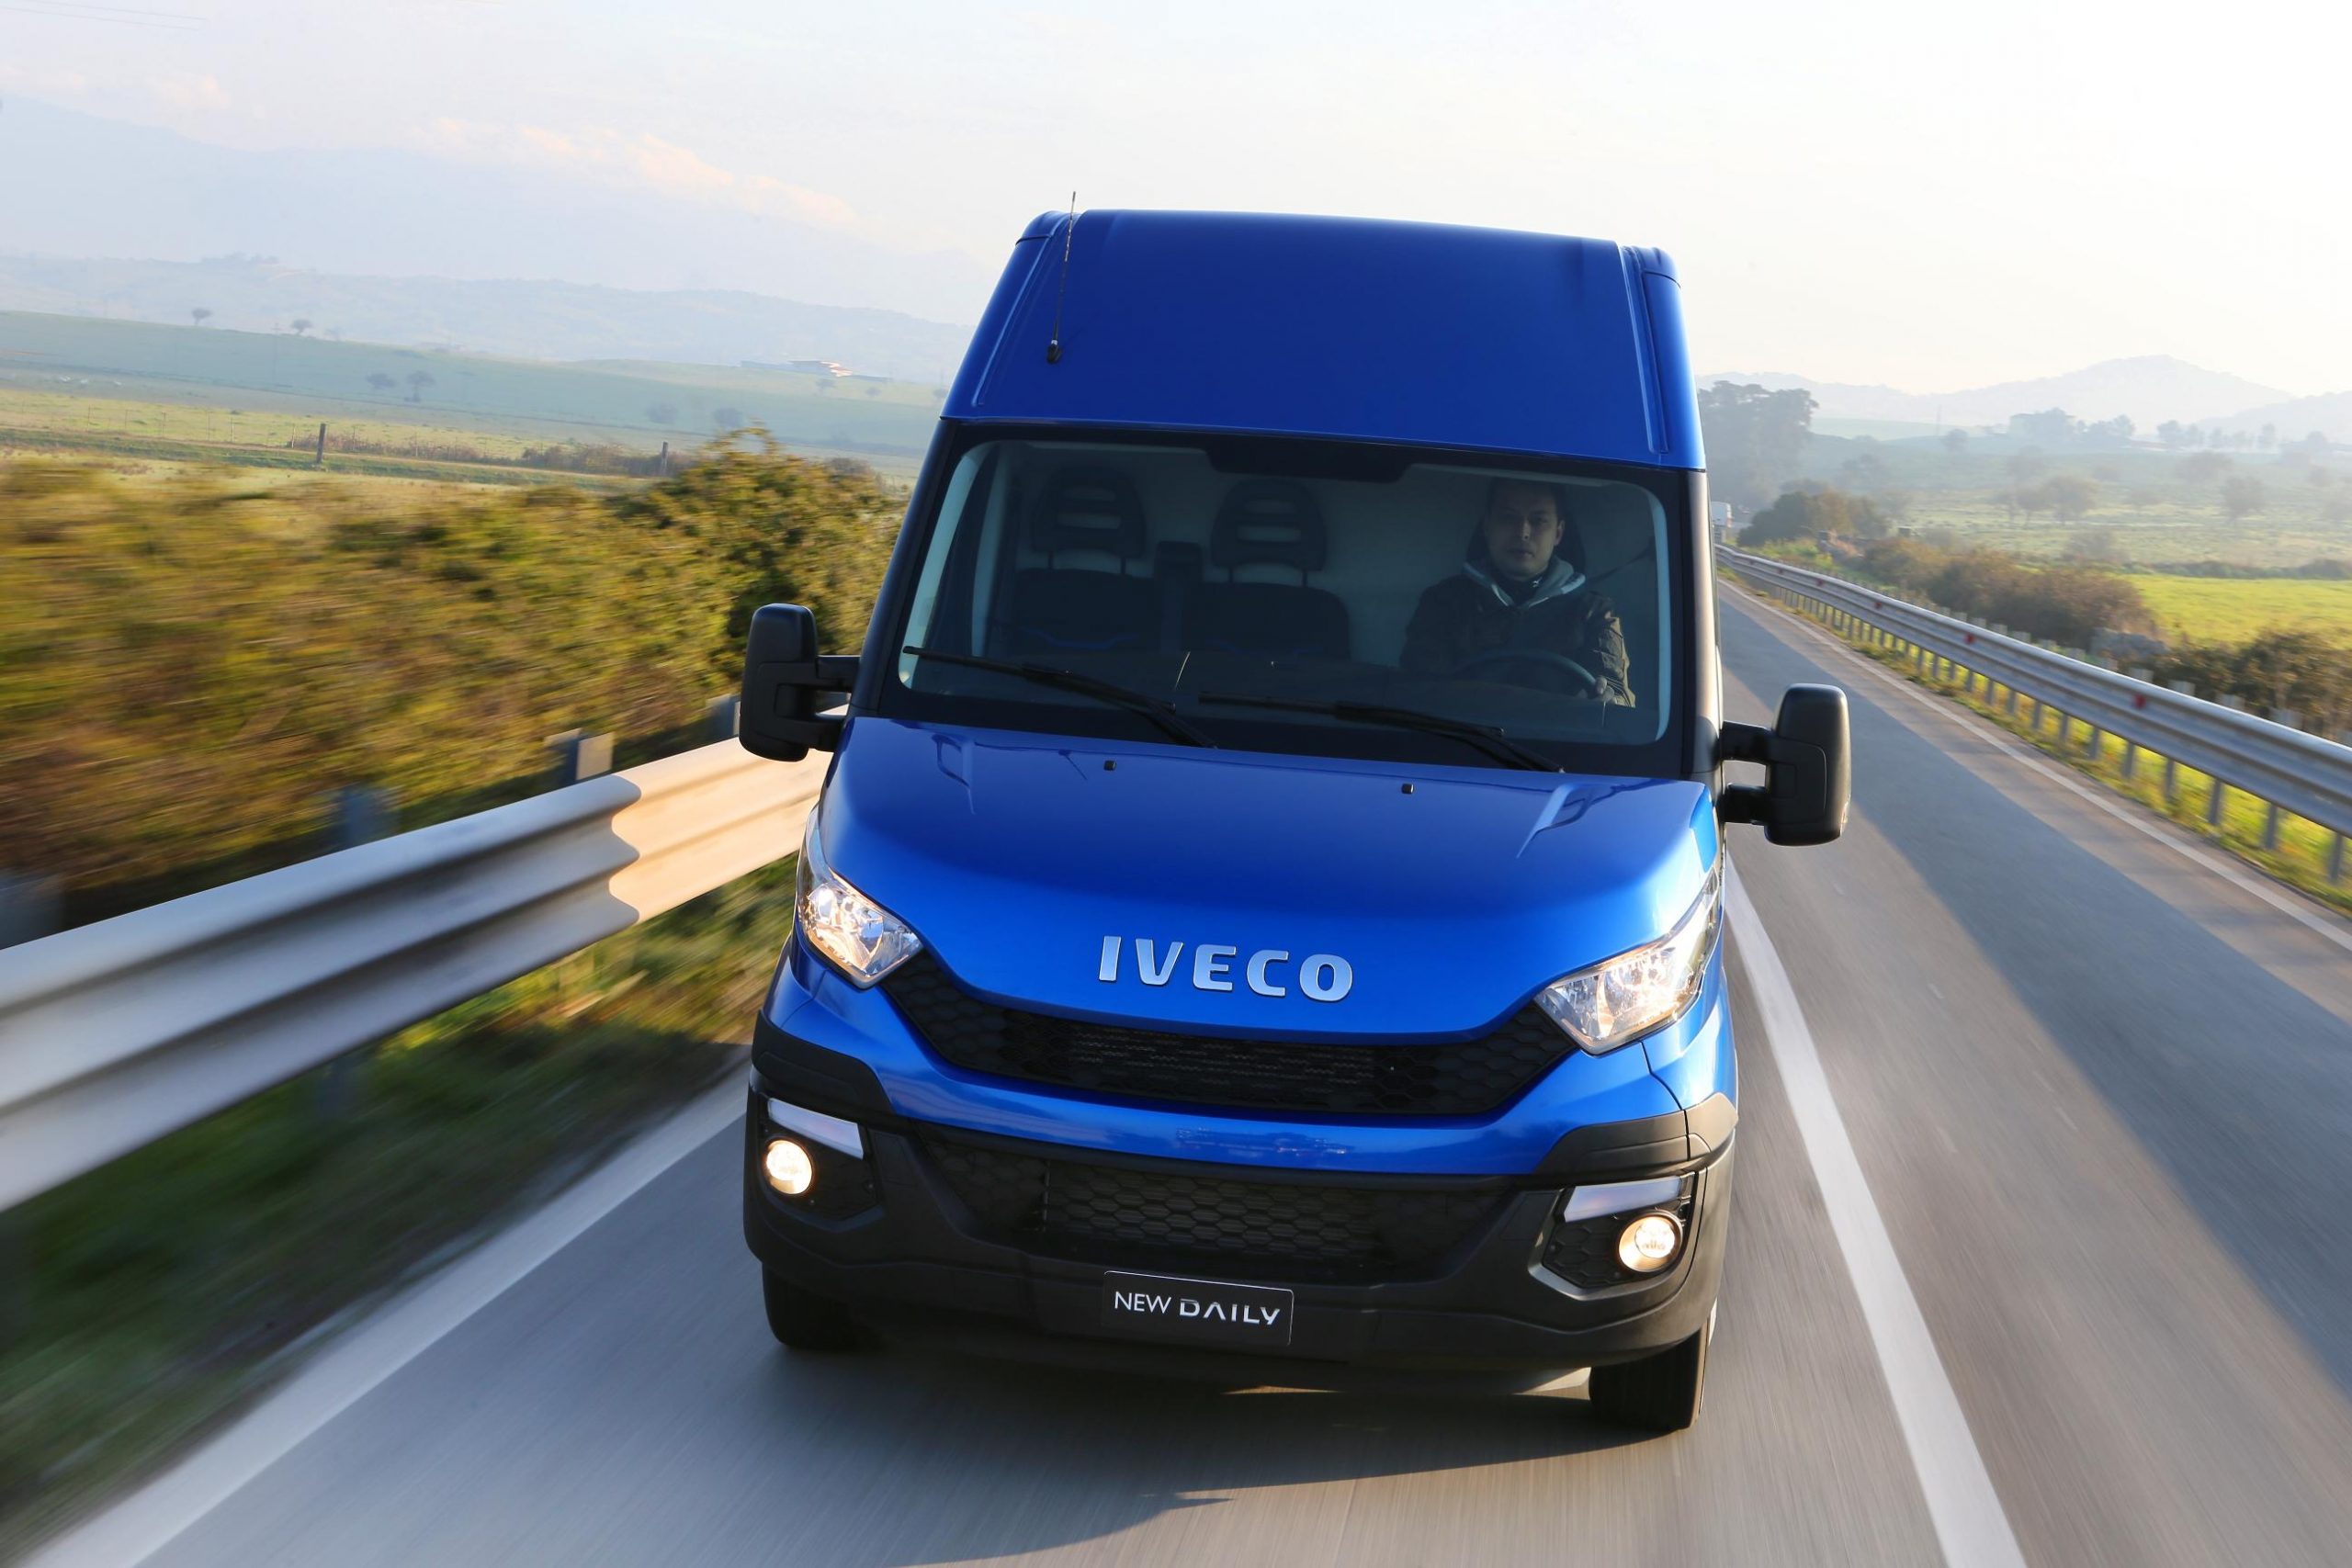 https://www.commercialvehicle.com/wp-content/uploads/2014/06/Iveco-Daily-3-scaled.jpg